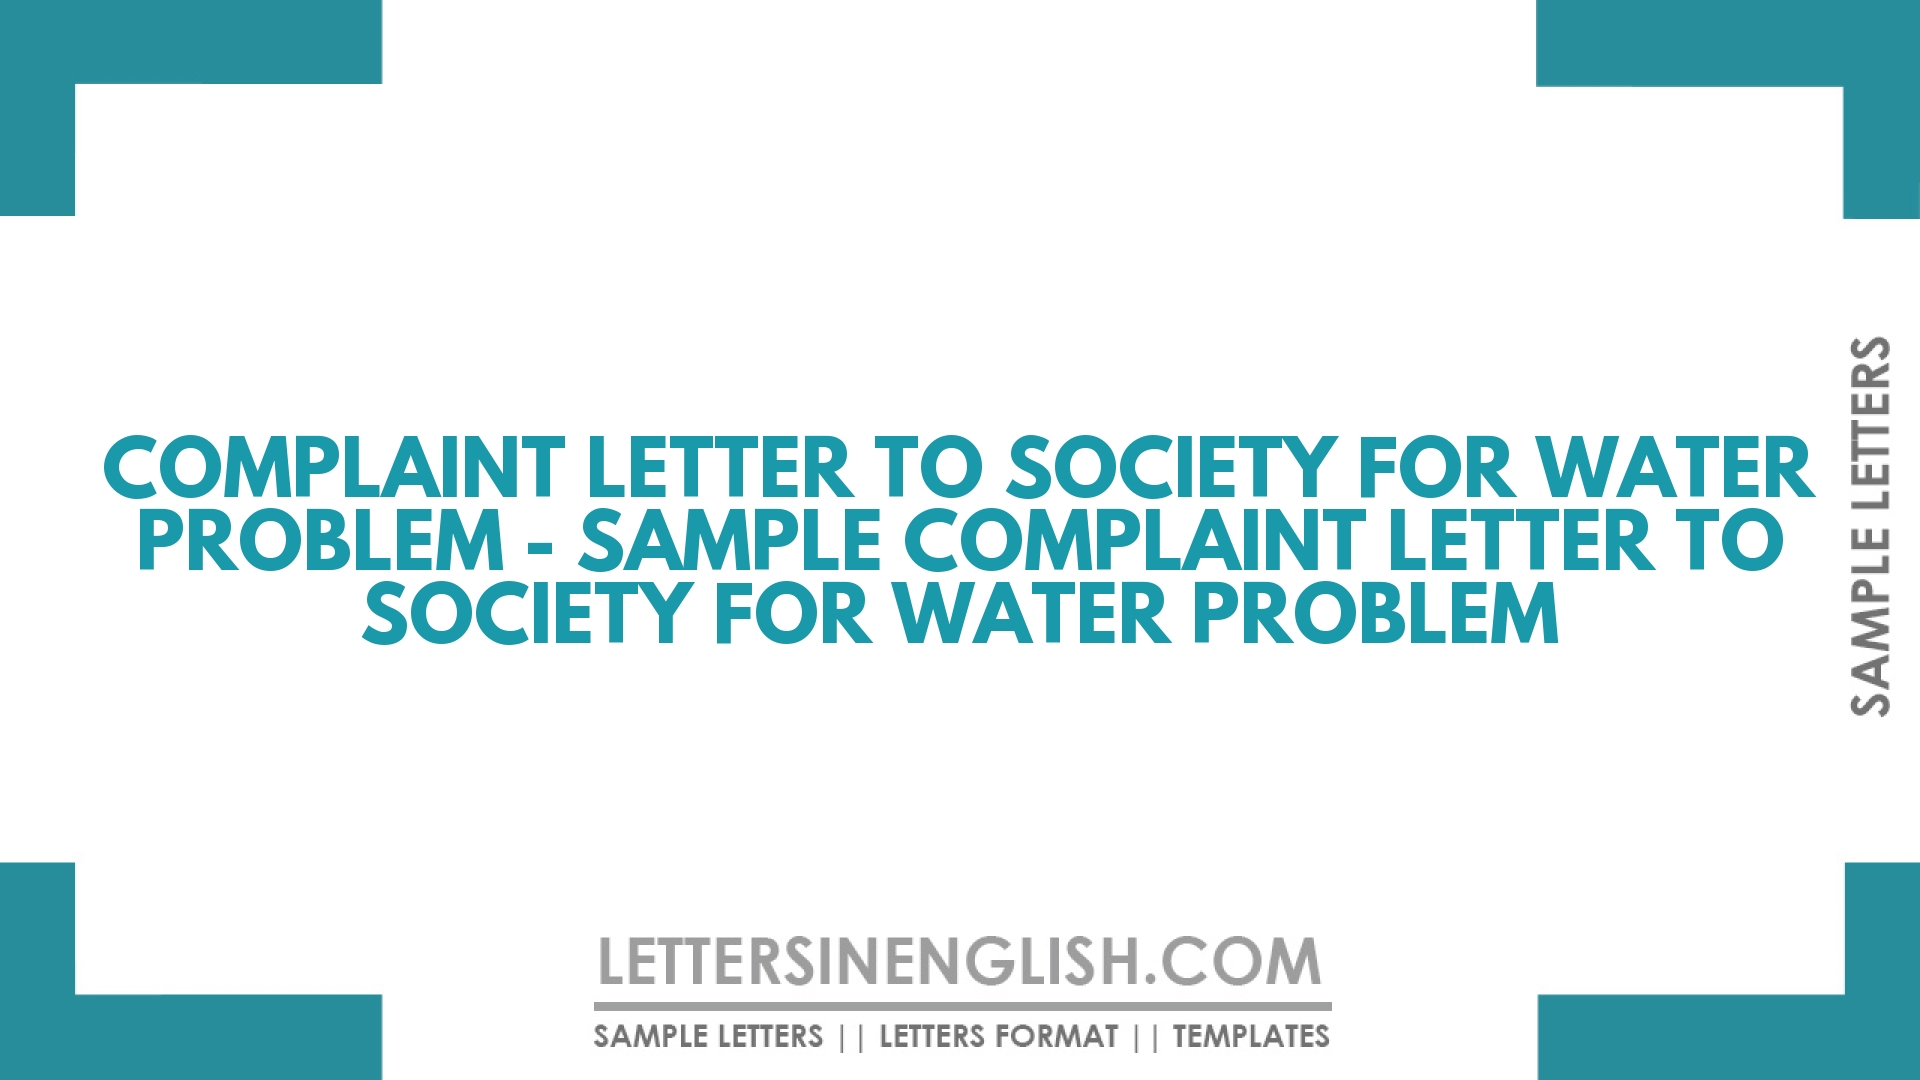 Complaint Letter to Society for Water Problem – Sample Complaint Letter to Society for Water Problem